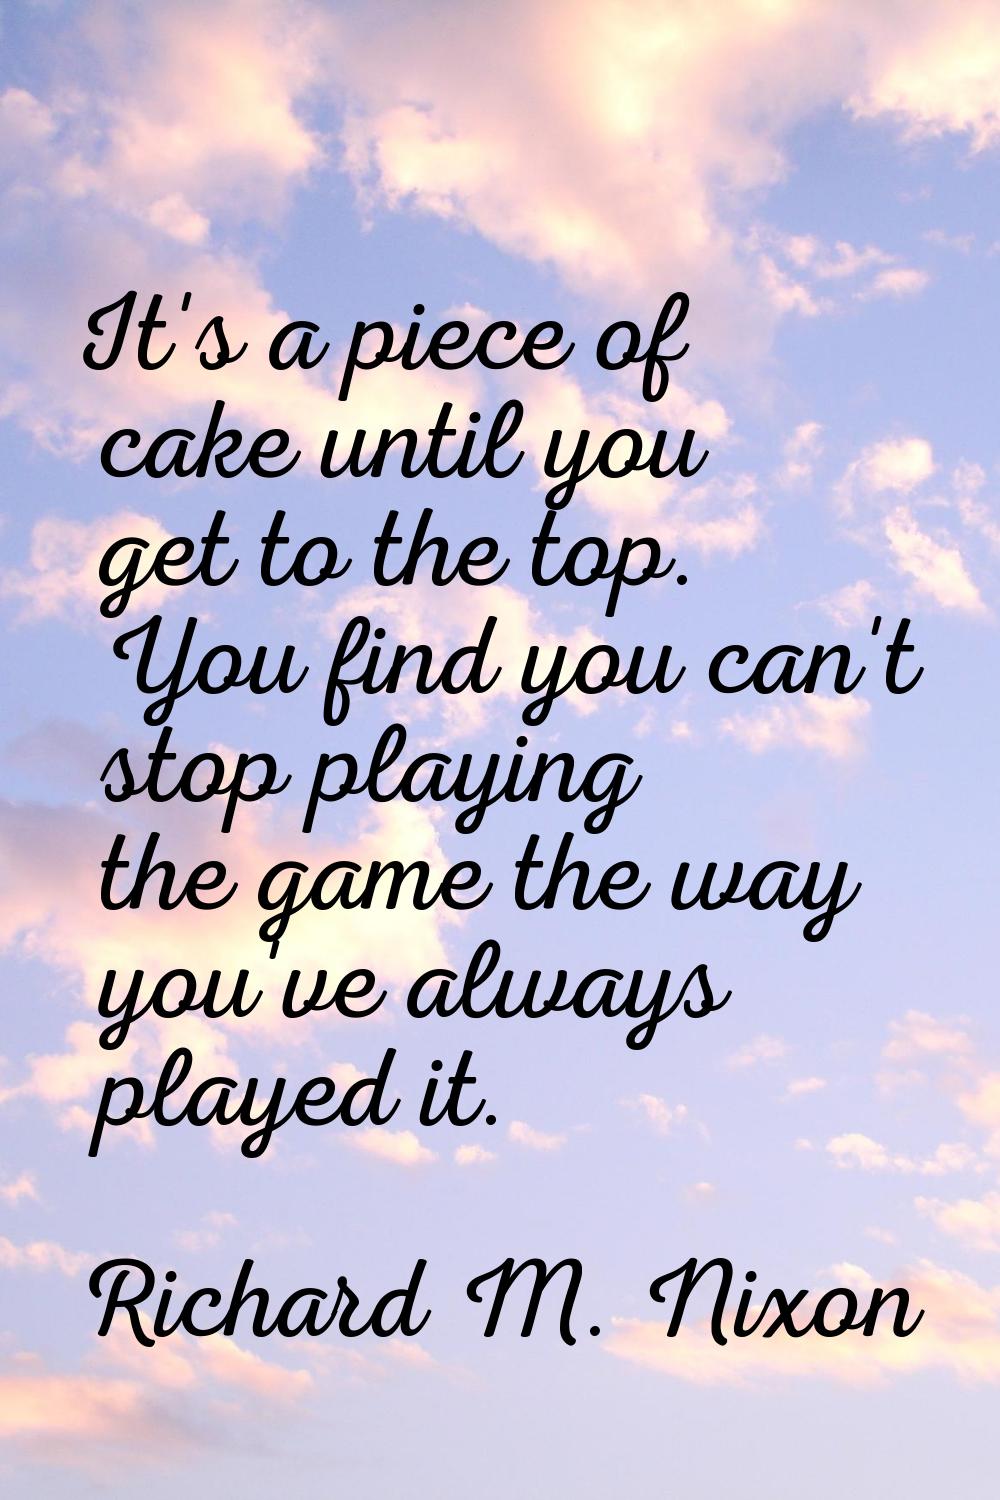 It's a piece of cake until you get to the top. You find you can't stop playing the game the way you